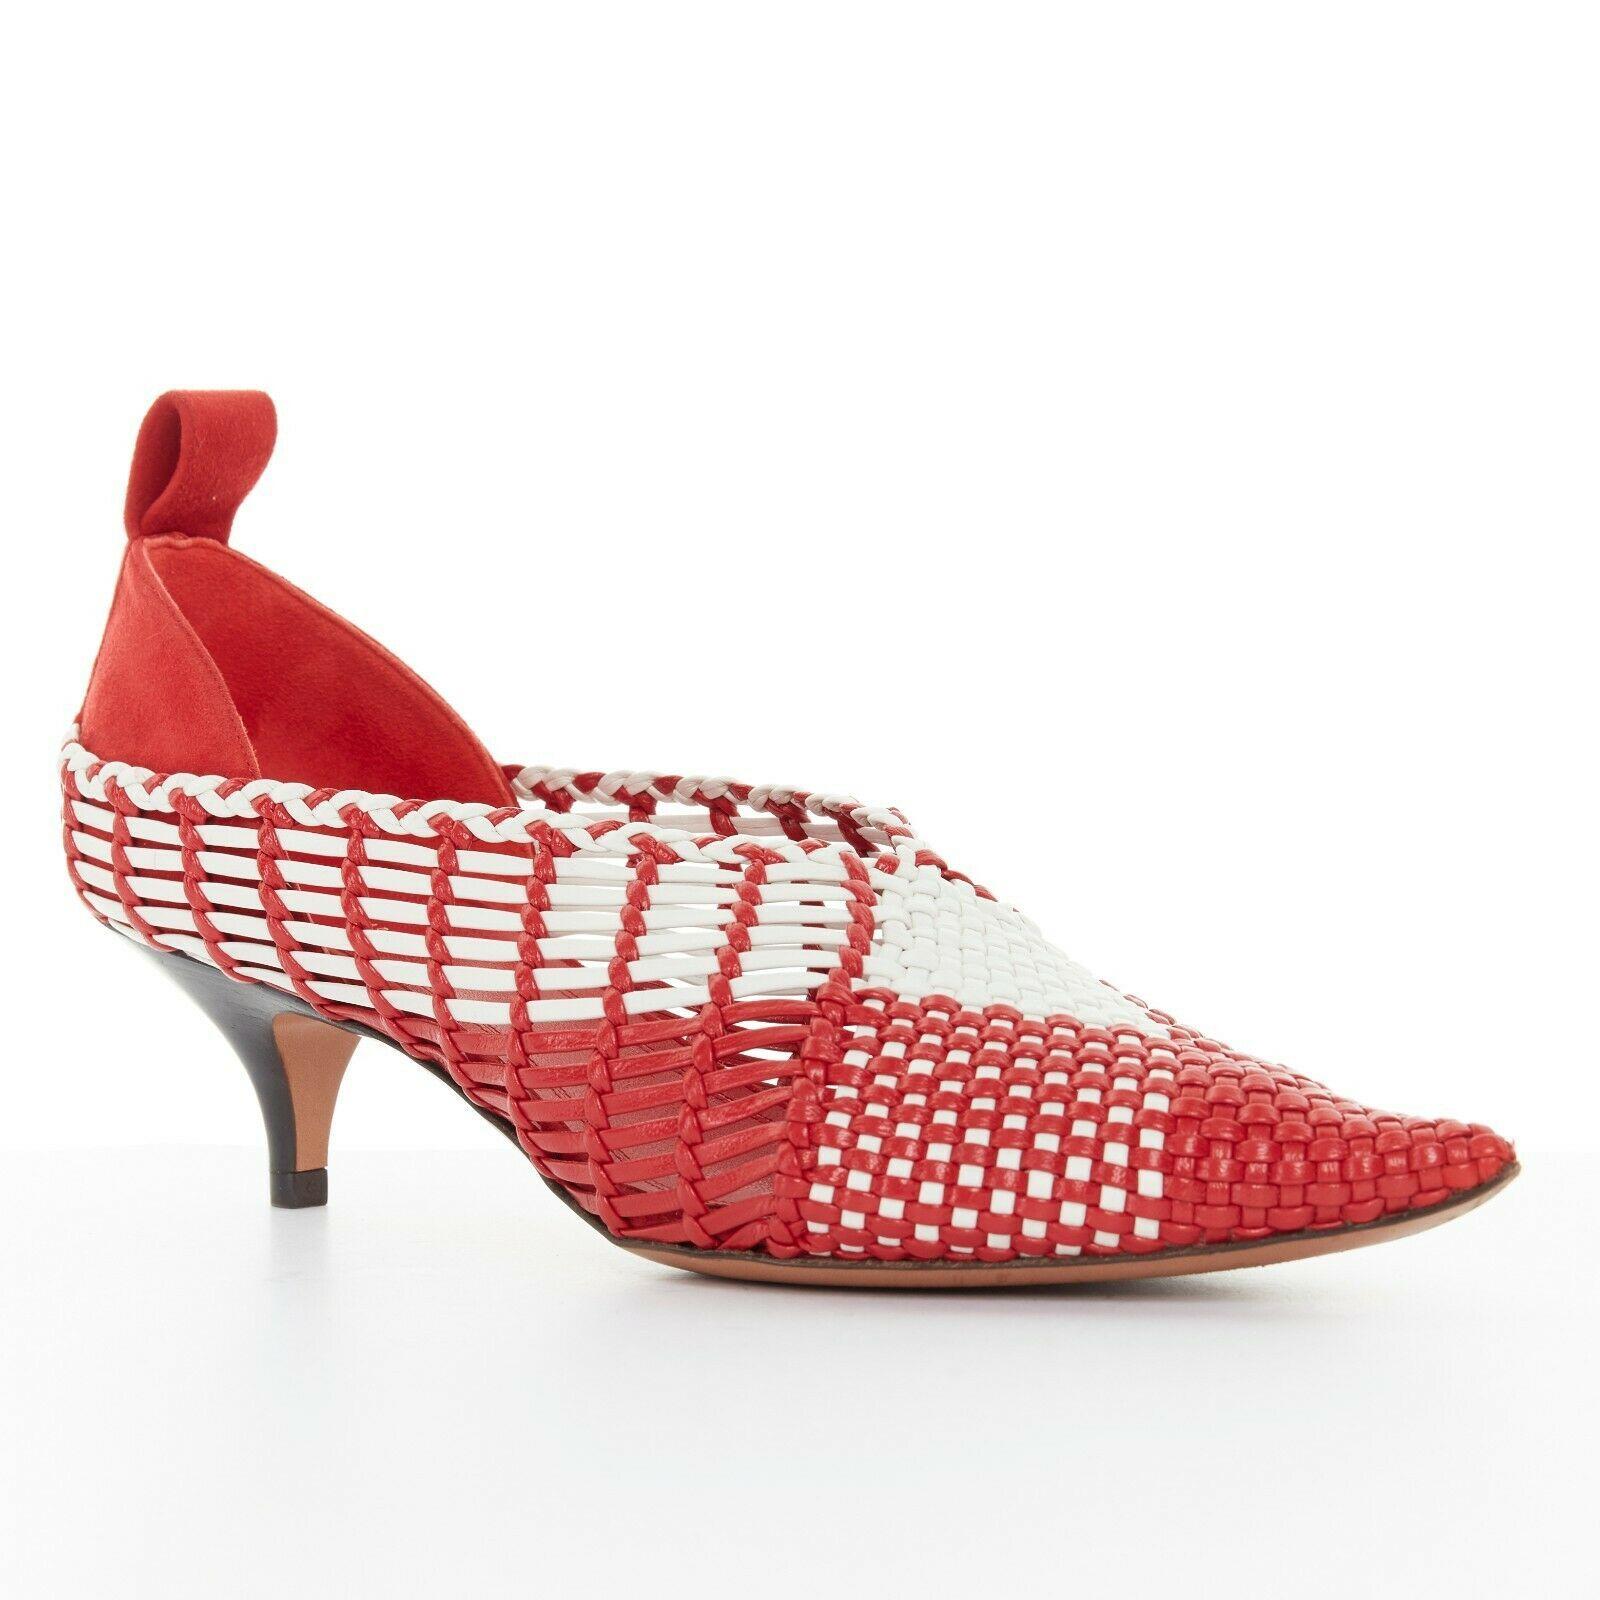 CELINE PHILO red white checkered woven leather pointy kitten hee pumpl EU38
CELINE BY PHOEBE PHILO 
Red and white checkered upper. 
Composed of woven leather strips. 
V-neck. 
Pointed toe. 
Suede covered heel. 
Pull tab detail at heel. 
Wooden